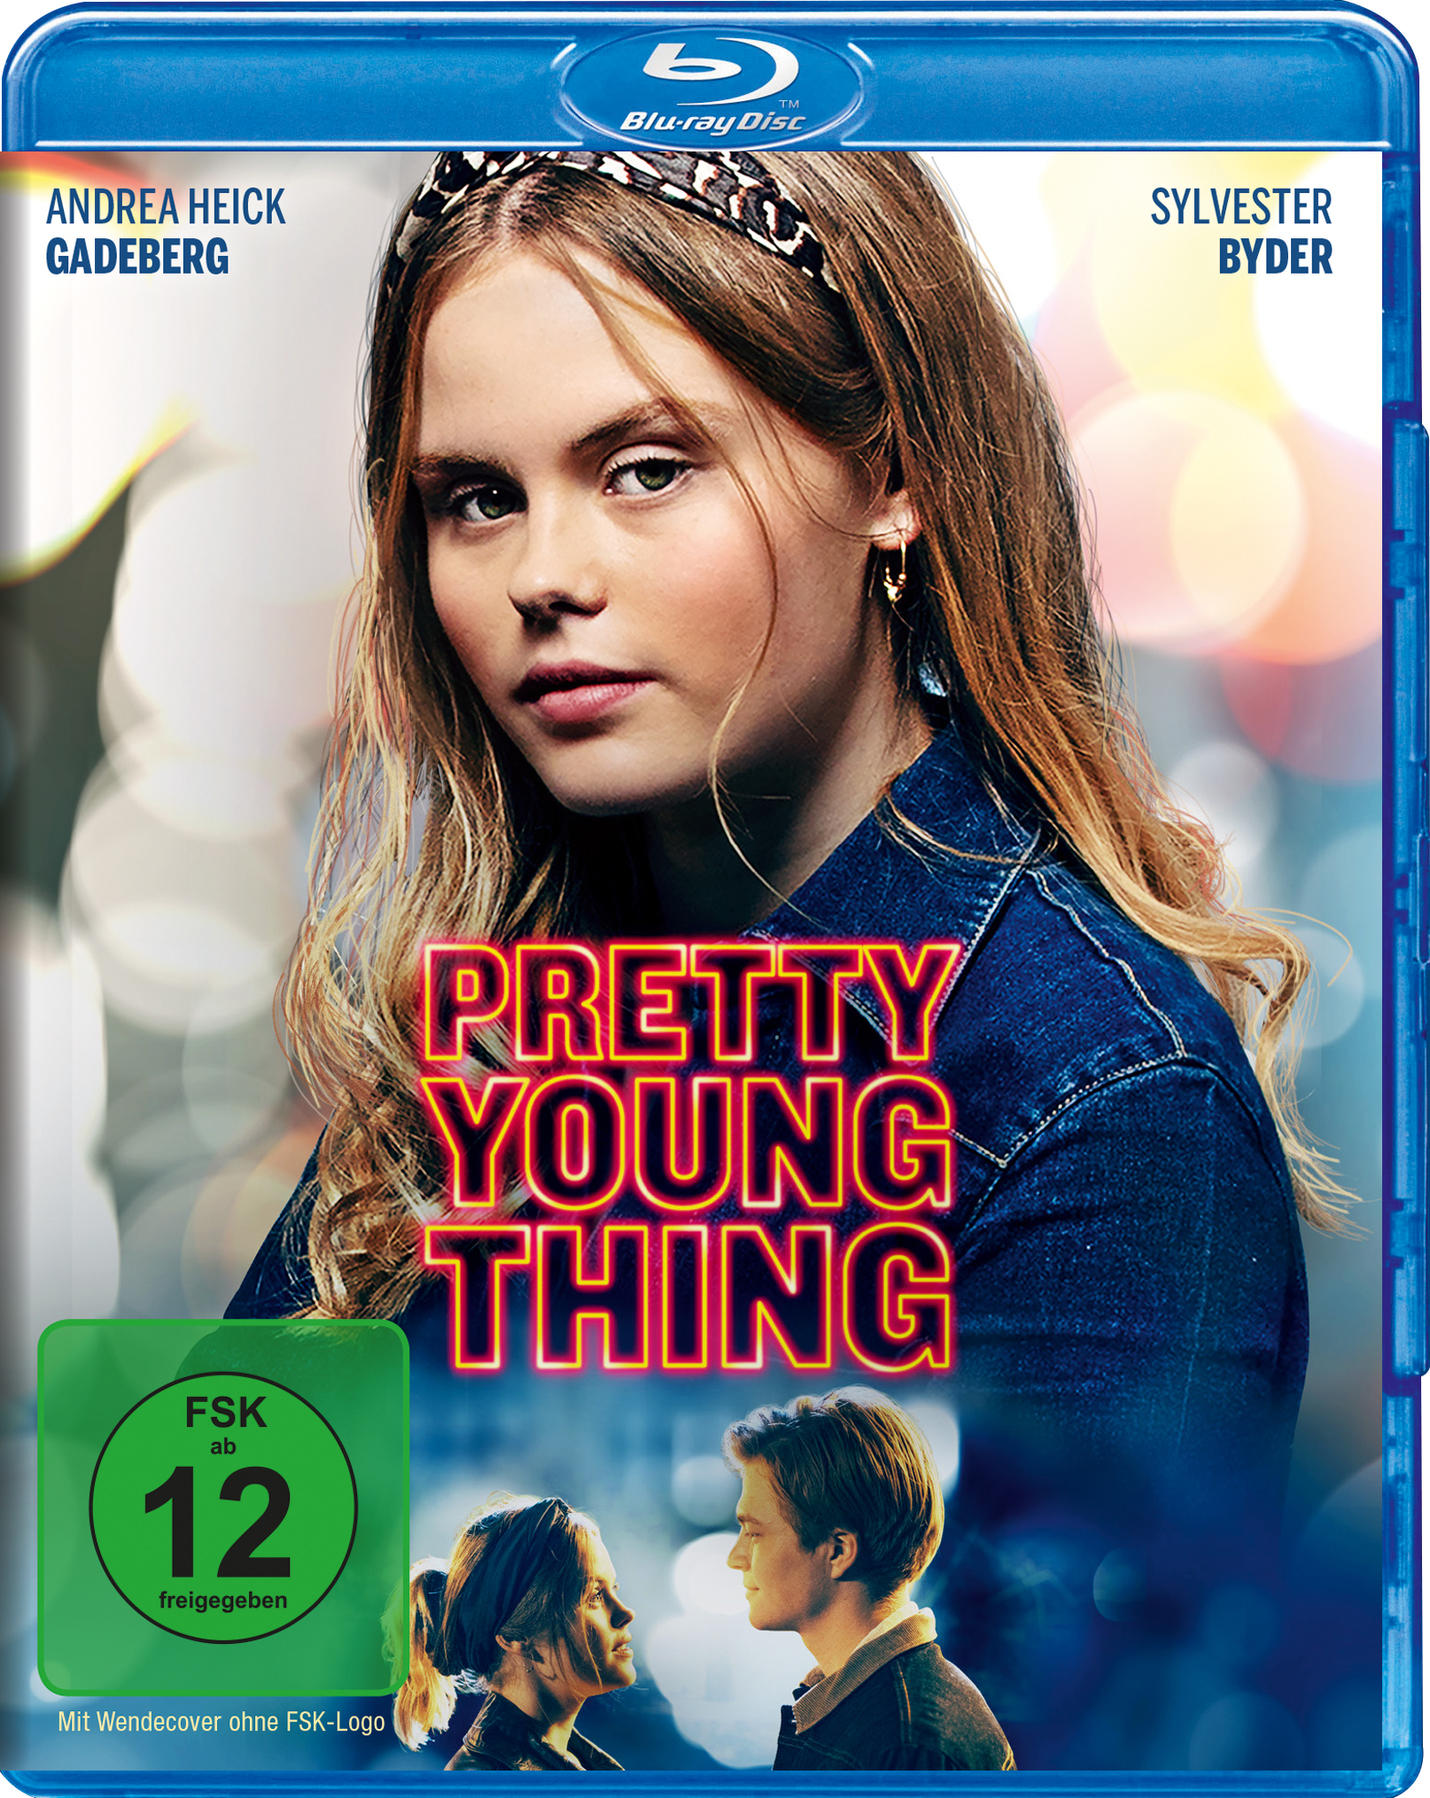 Pretty Young Blu-ray Thing